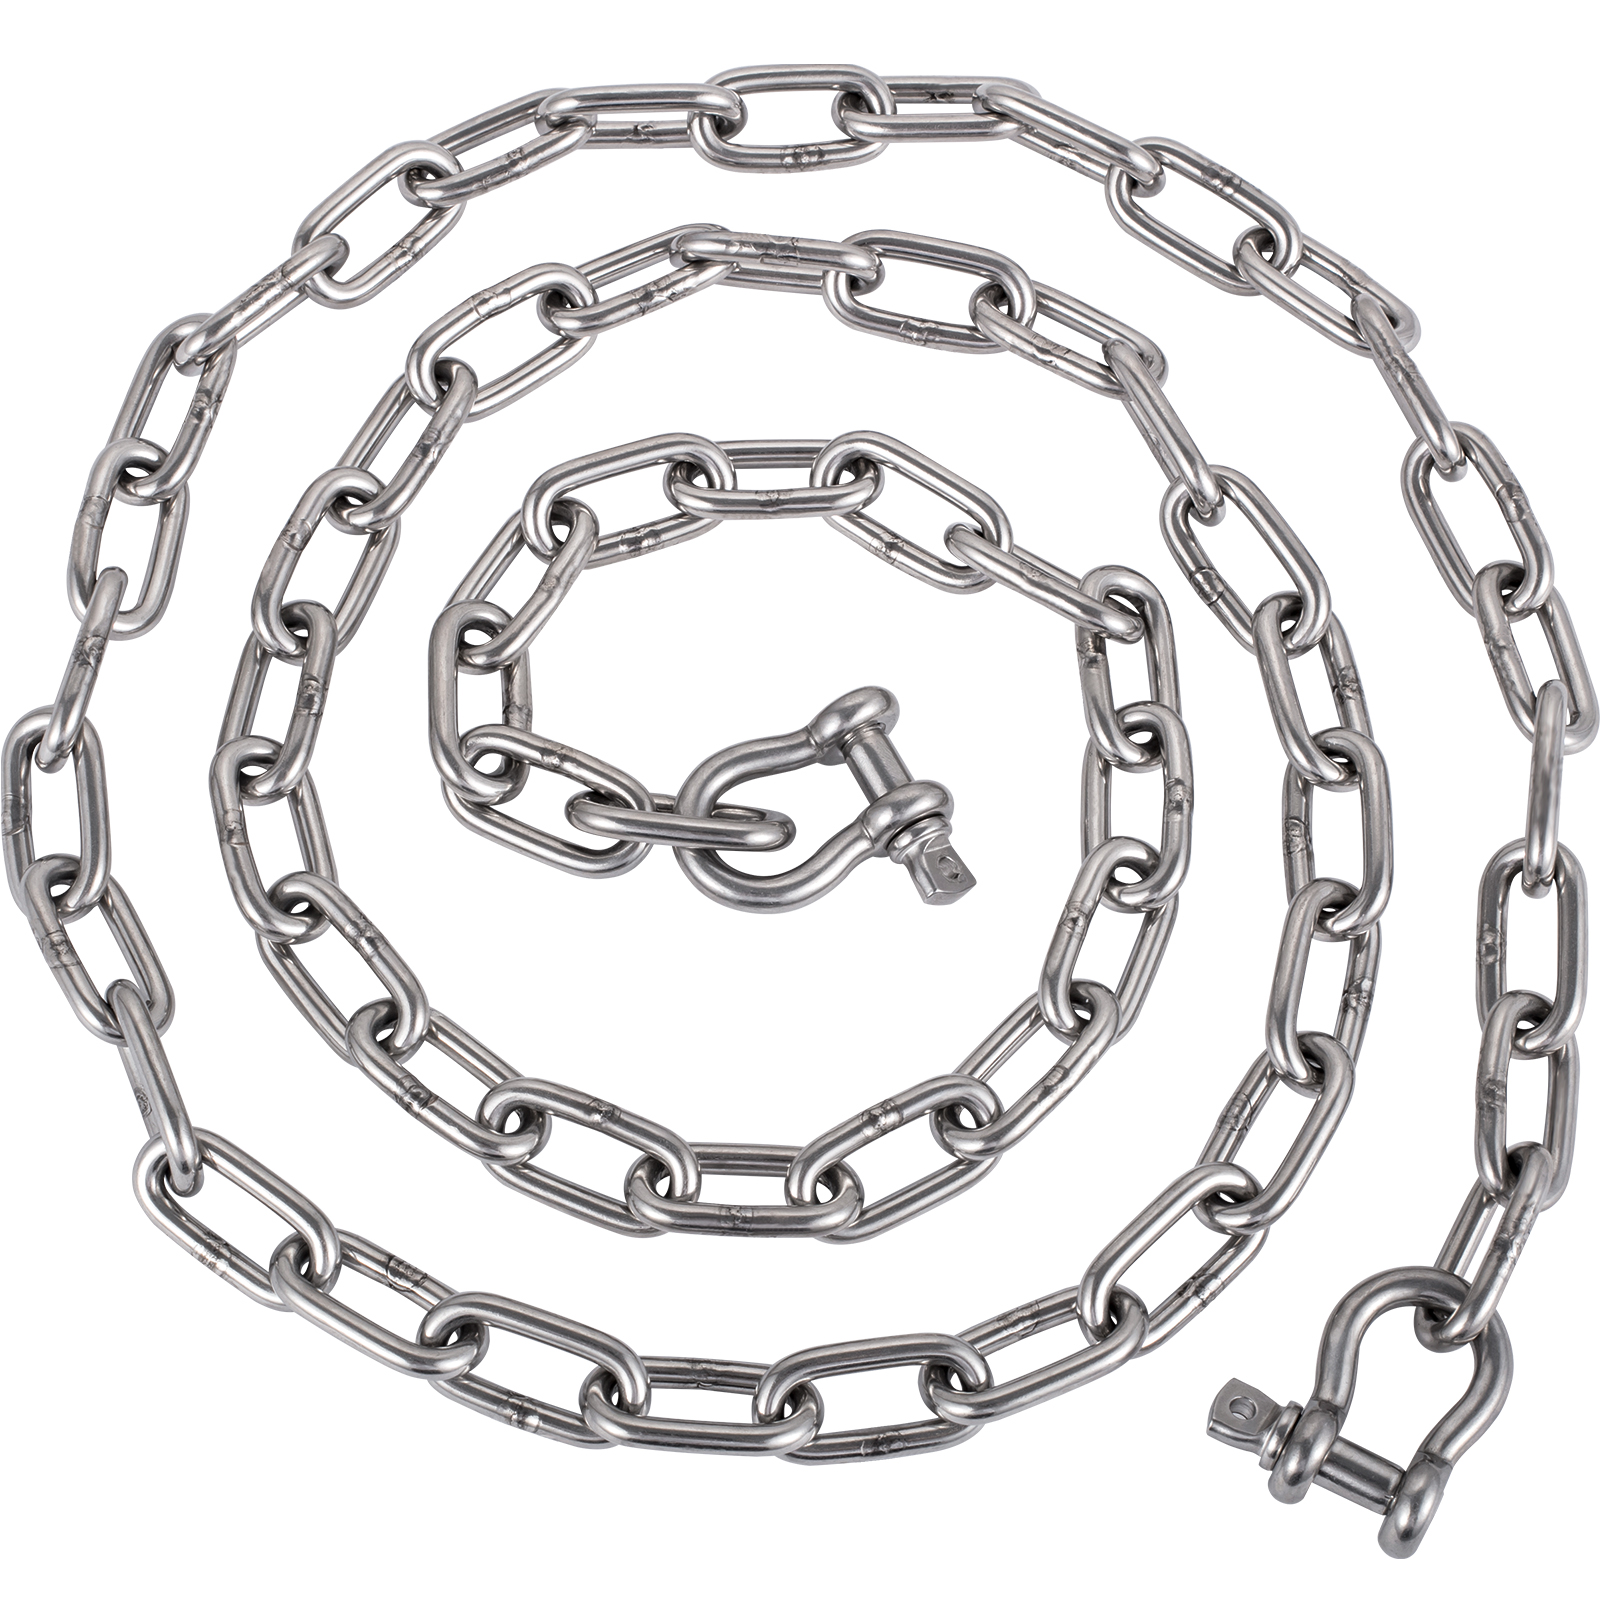 1/4 316 Stainless Steel Anchor Chain Marine Grade 2 5 10 15 20 25 30 40 50 20FT 